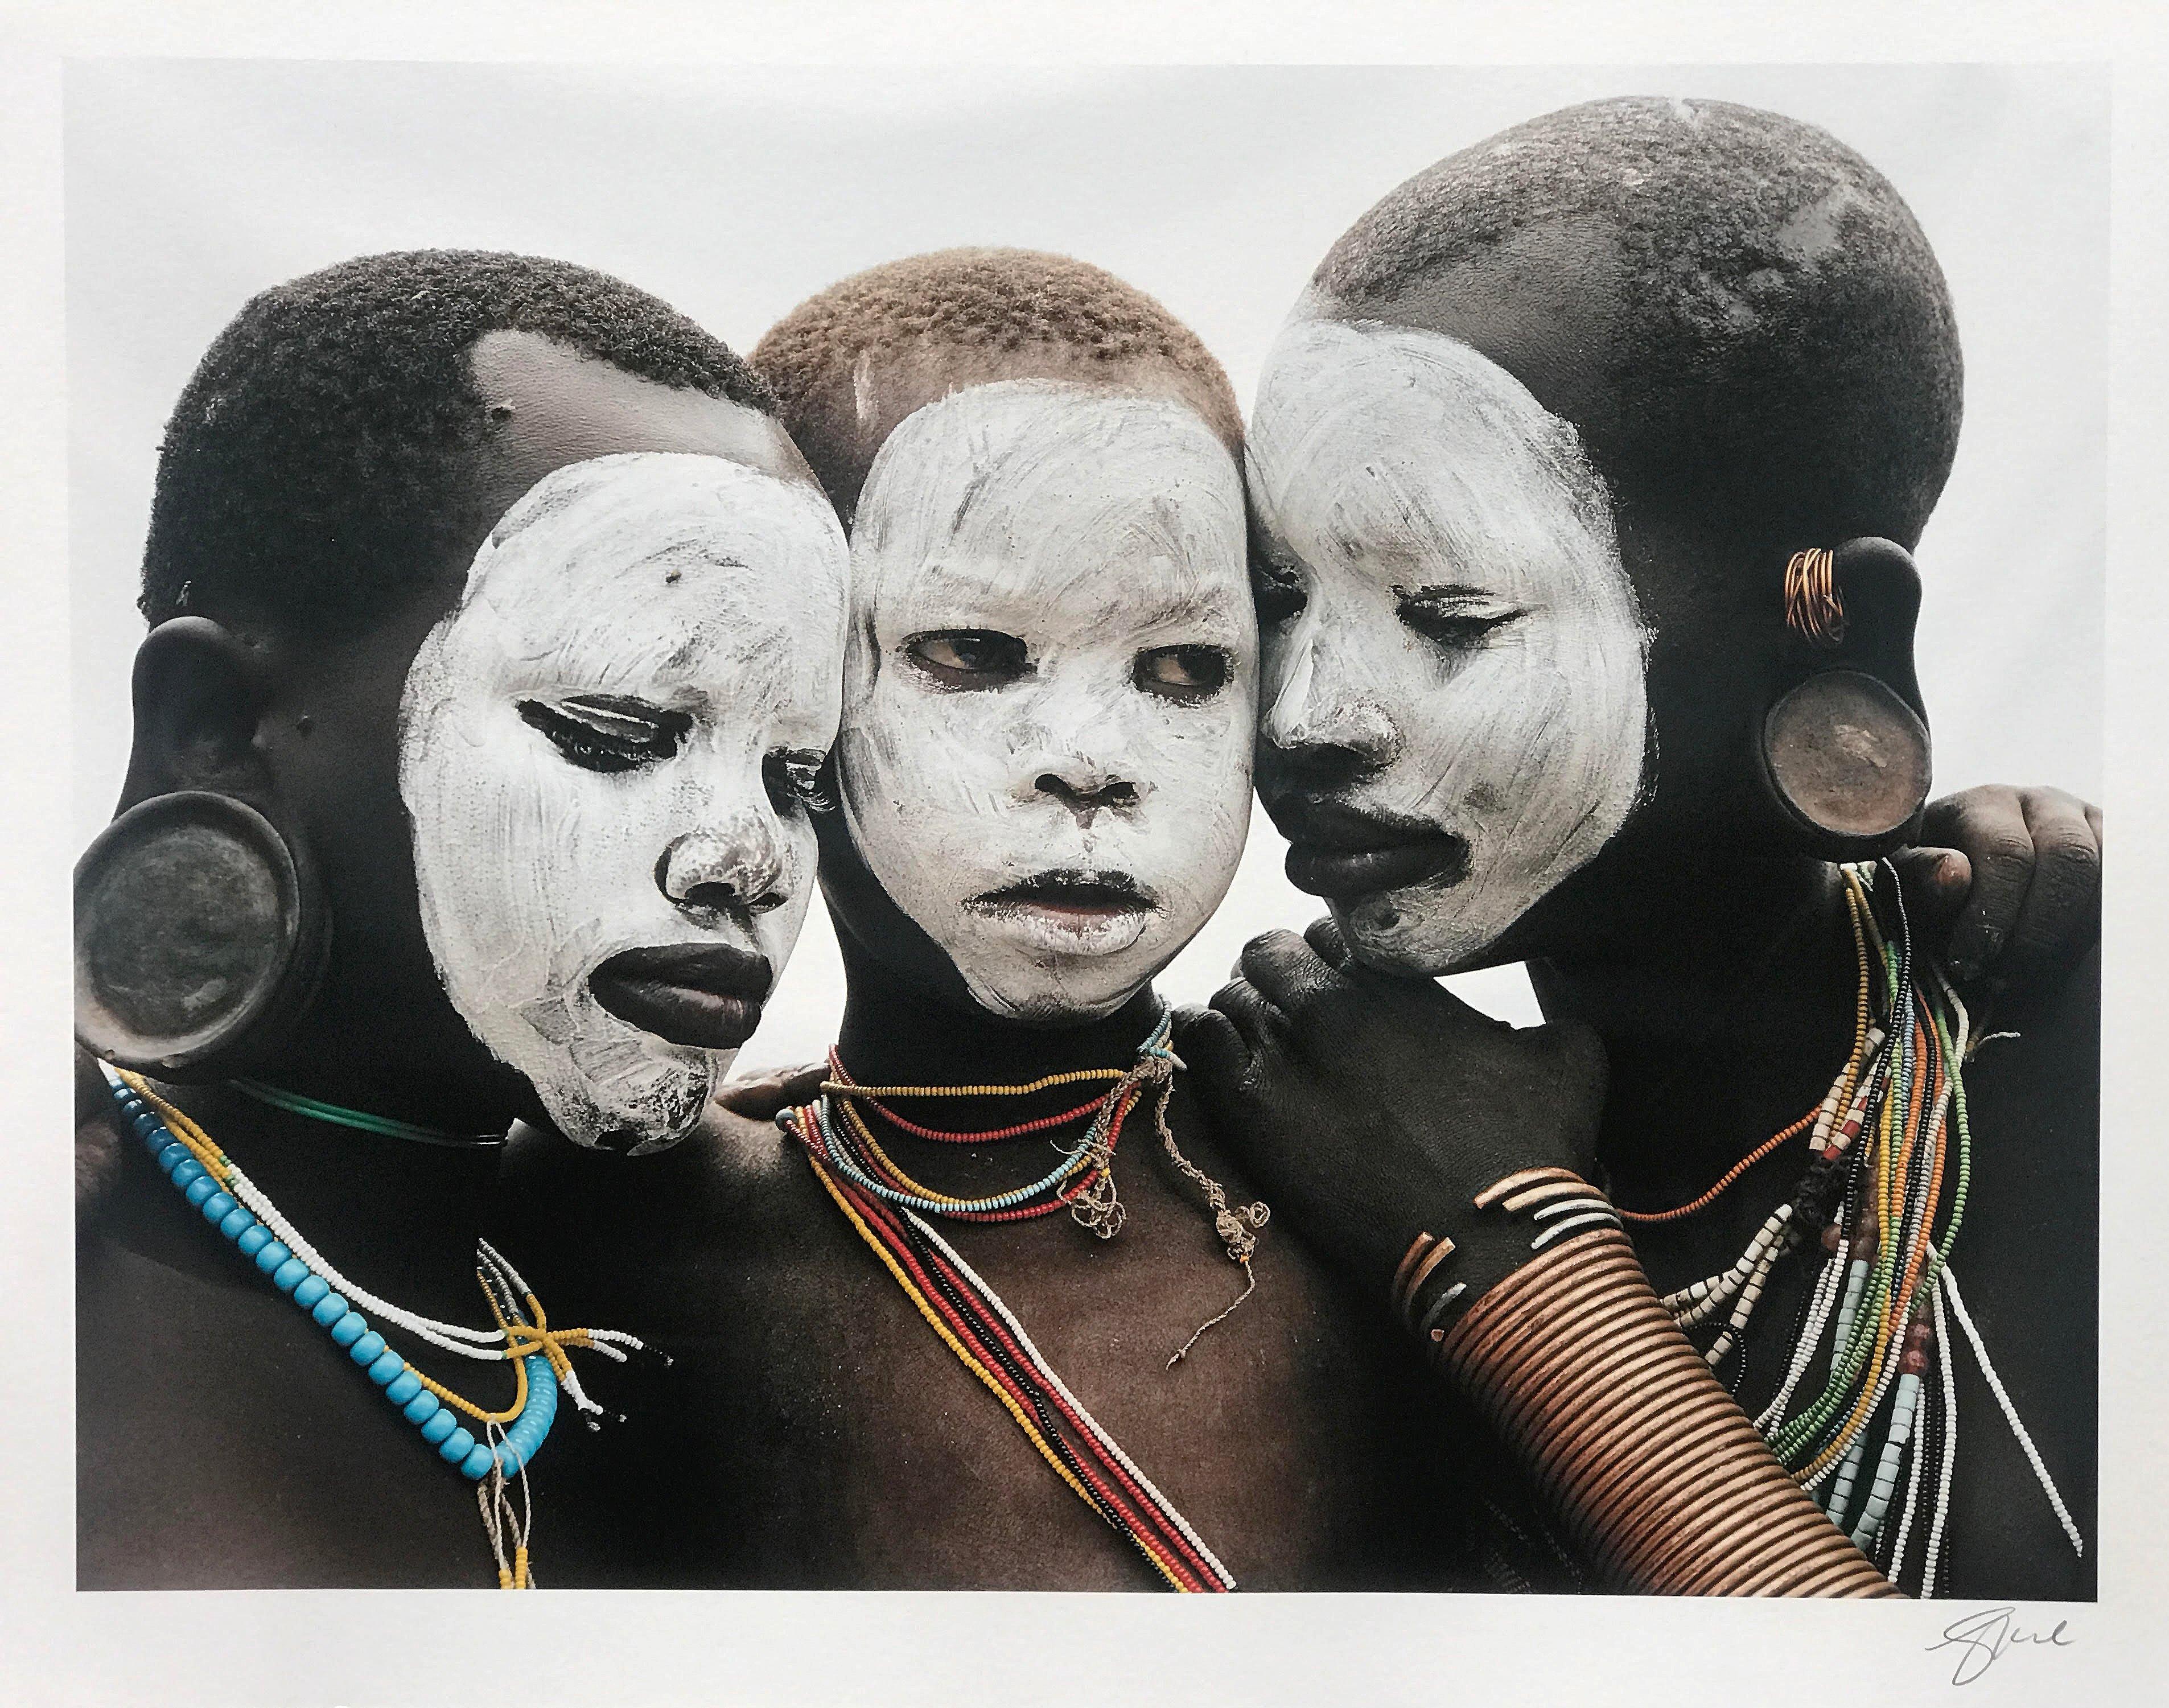 Jean-Michel Voge Color Photograph - Family, Contemporary Color Photo of Omo Valley Tribal Family, Ethiopia, Africa